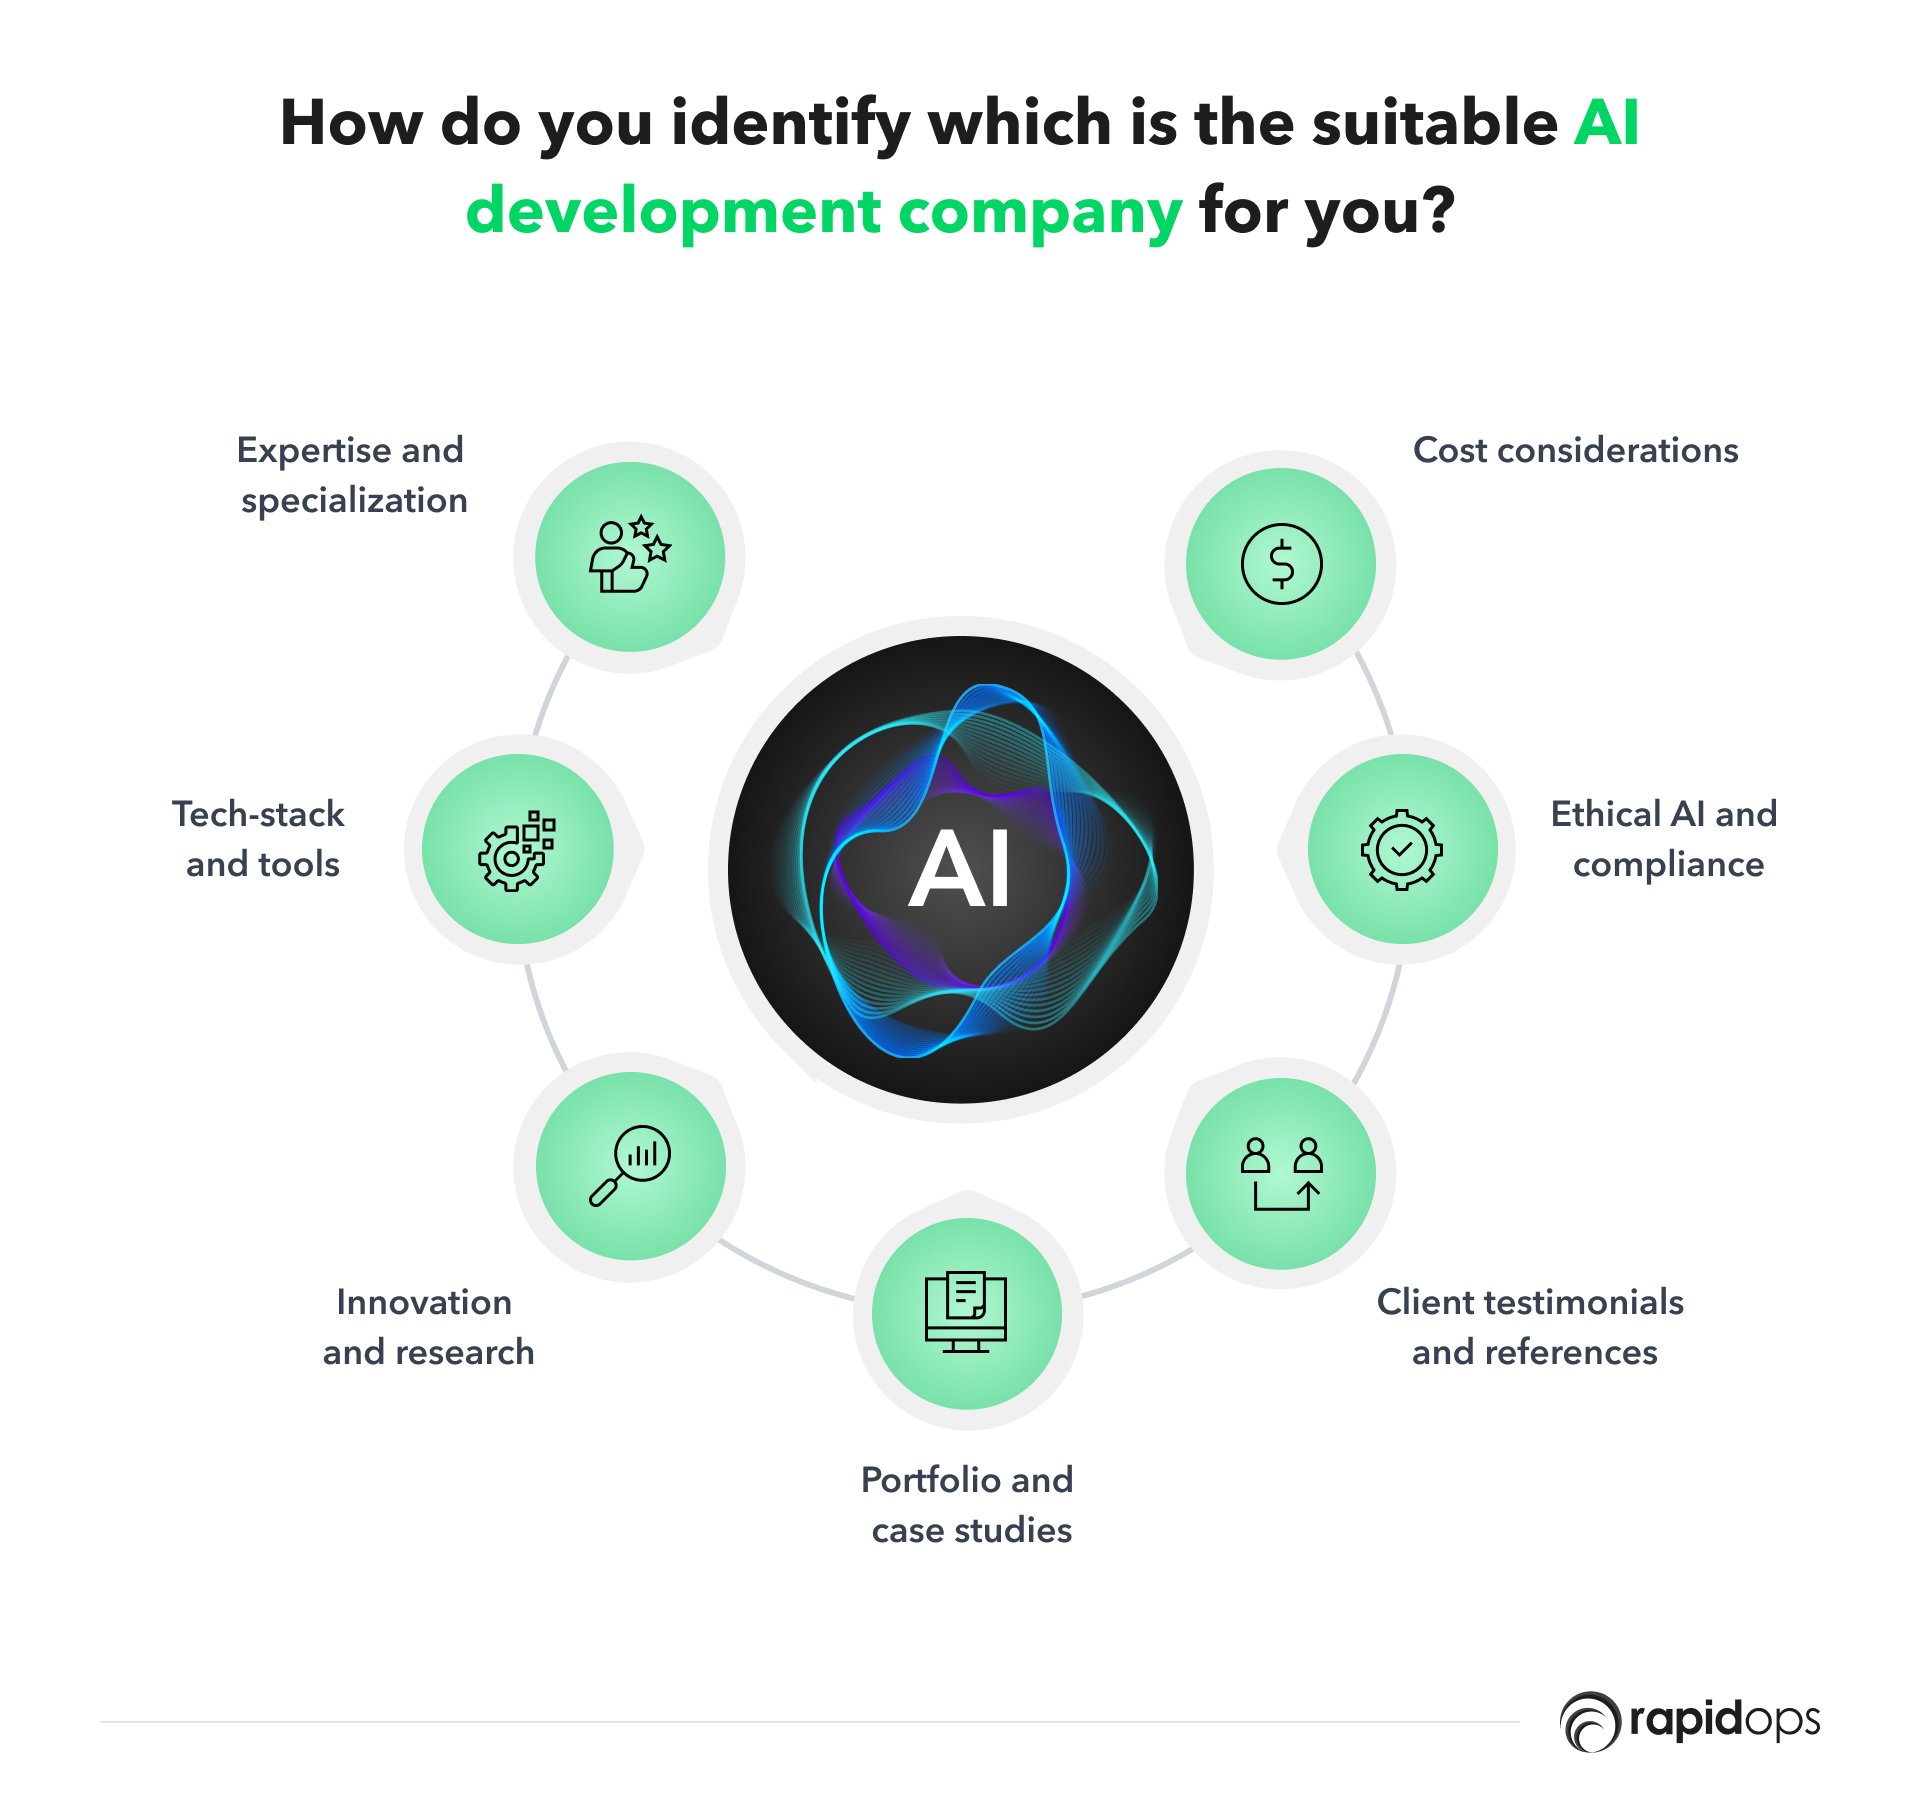 How to identify a suitable AI development company for you